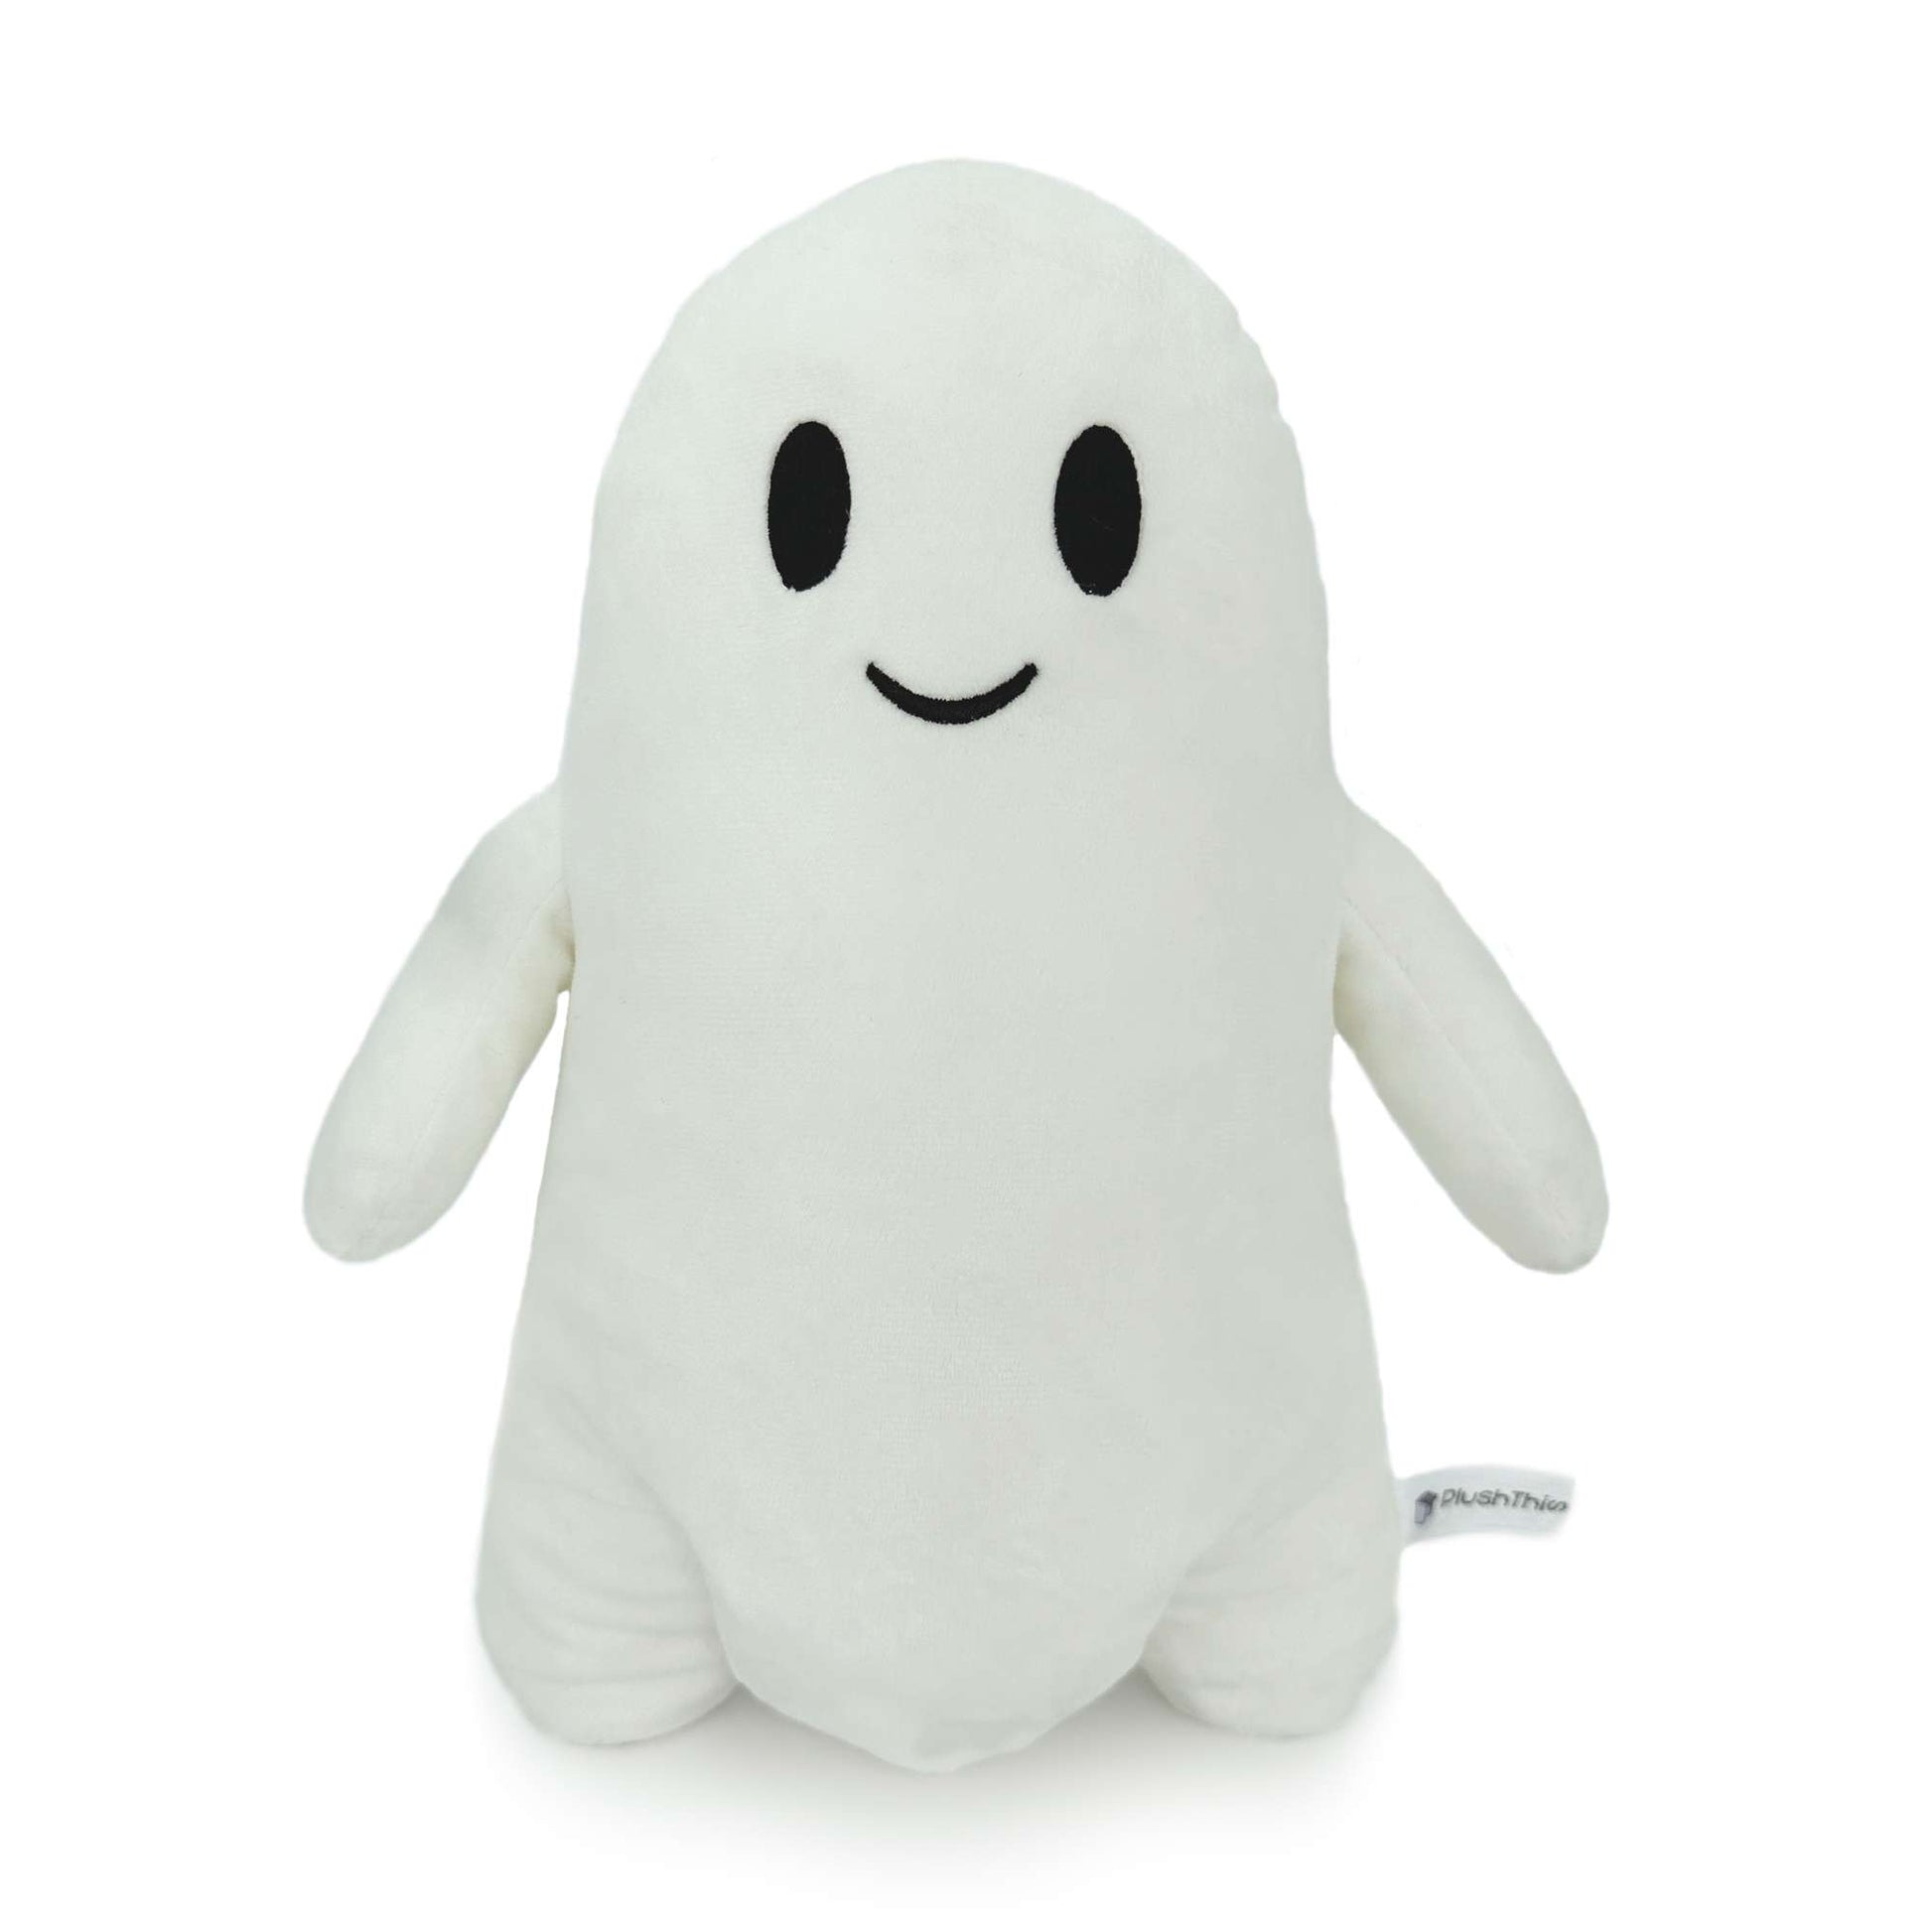 Ghost plush toy for Halloween front view